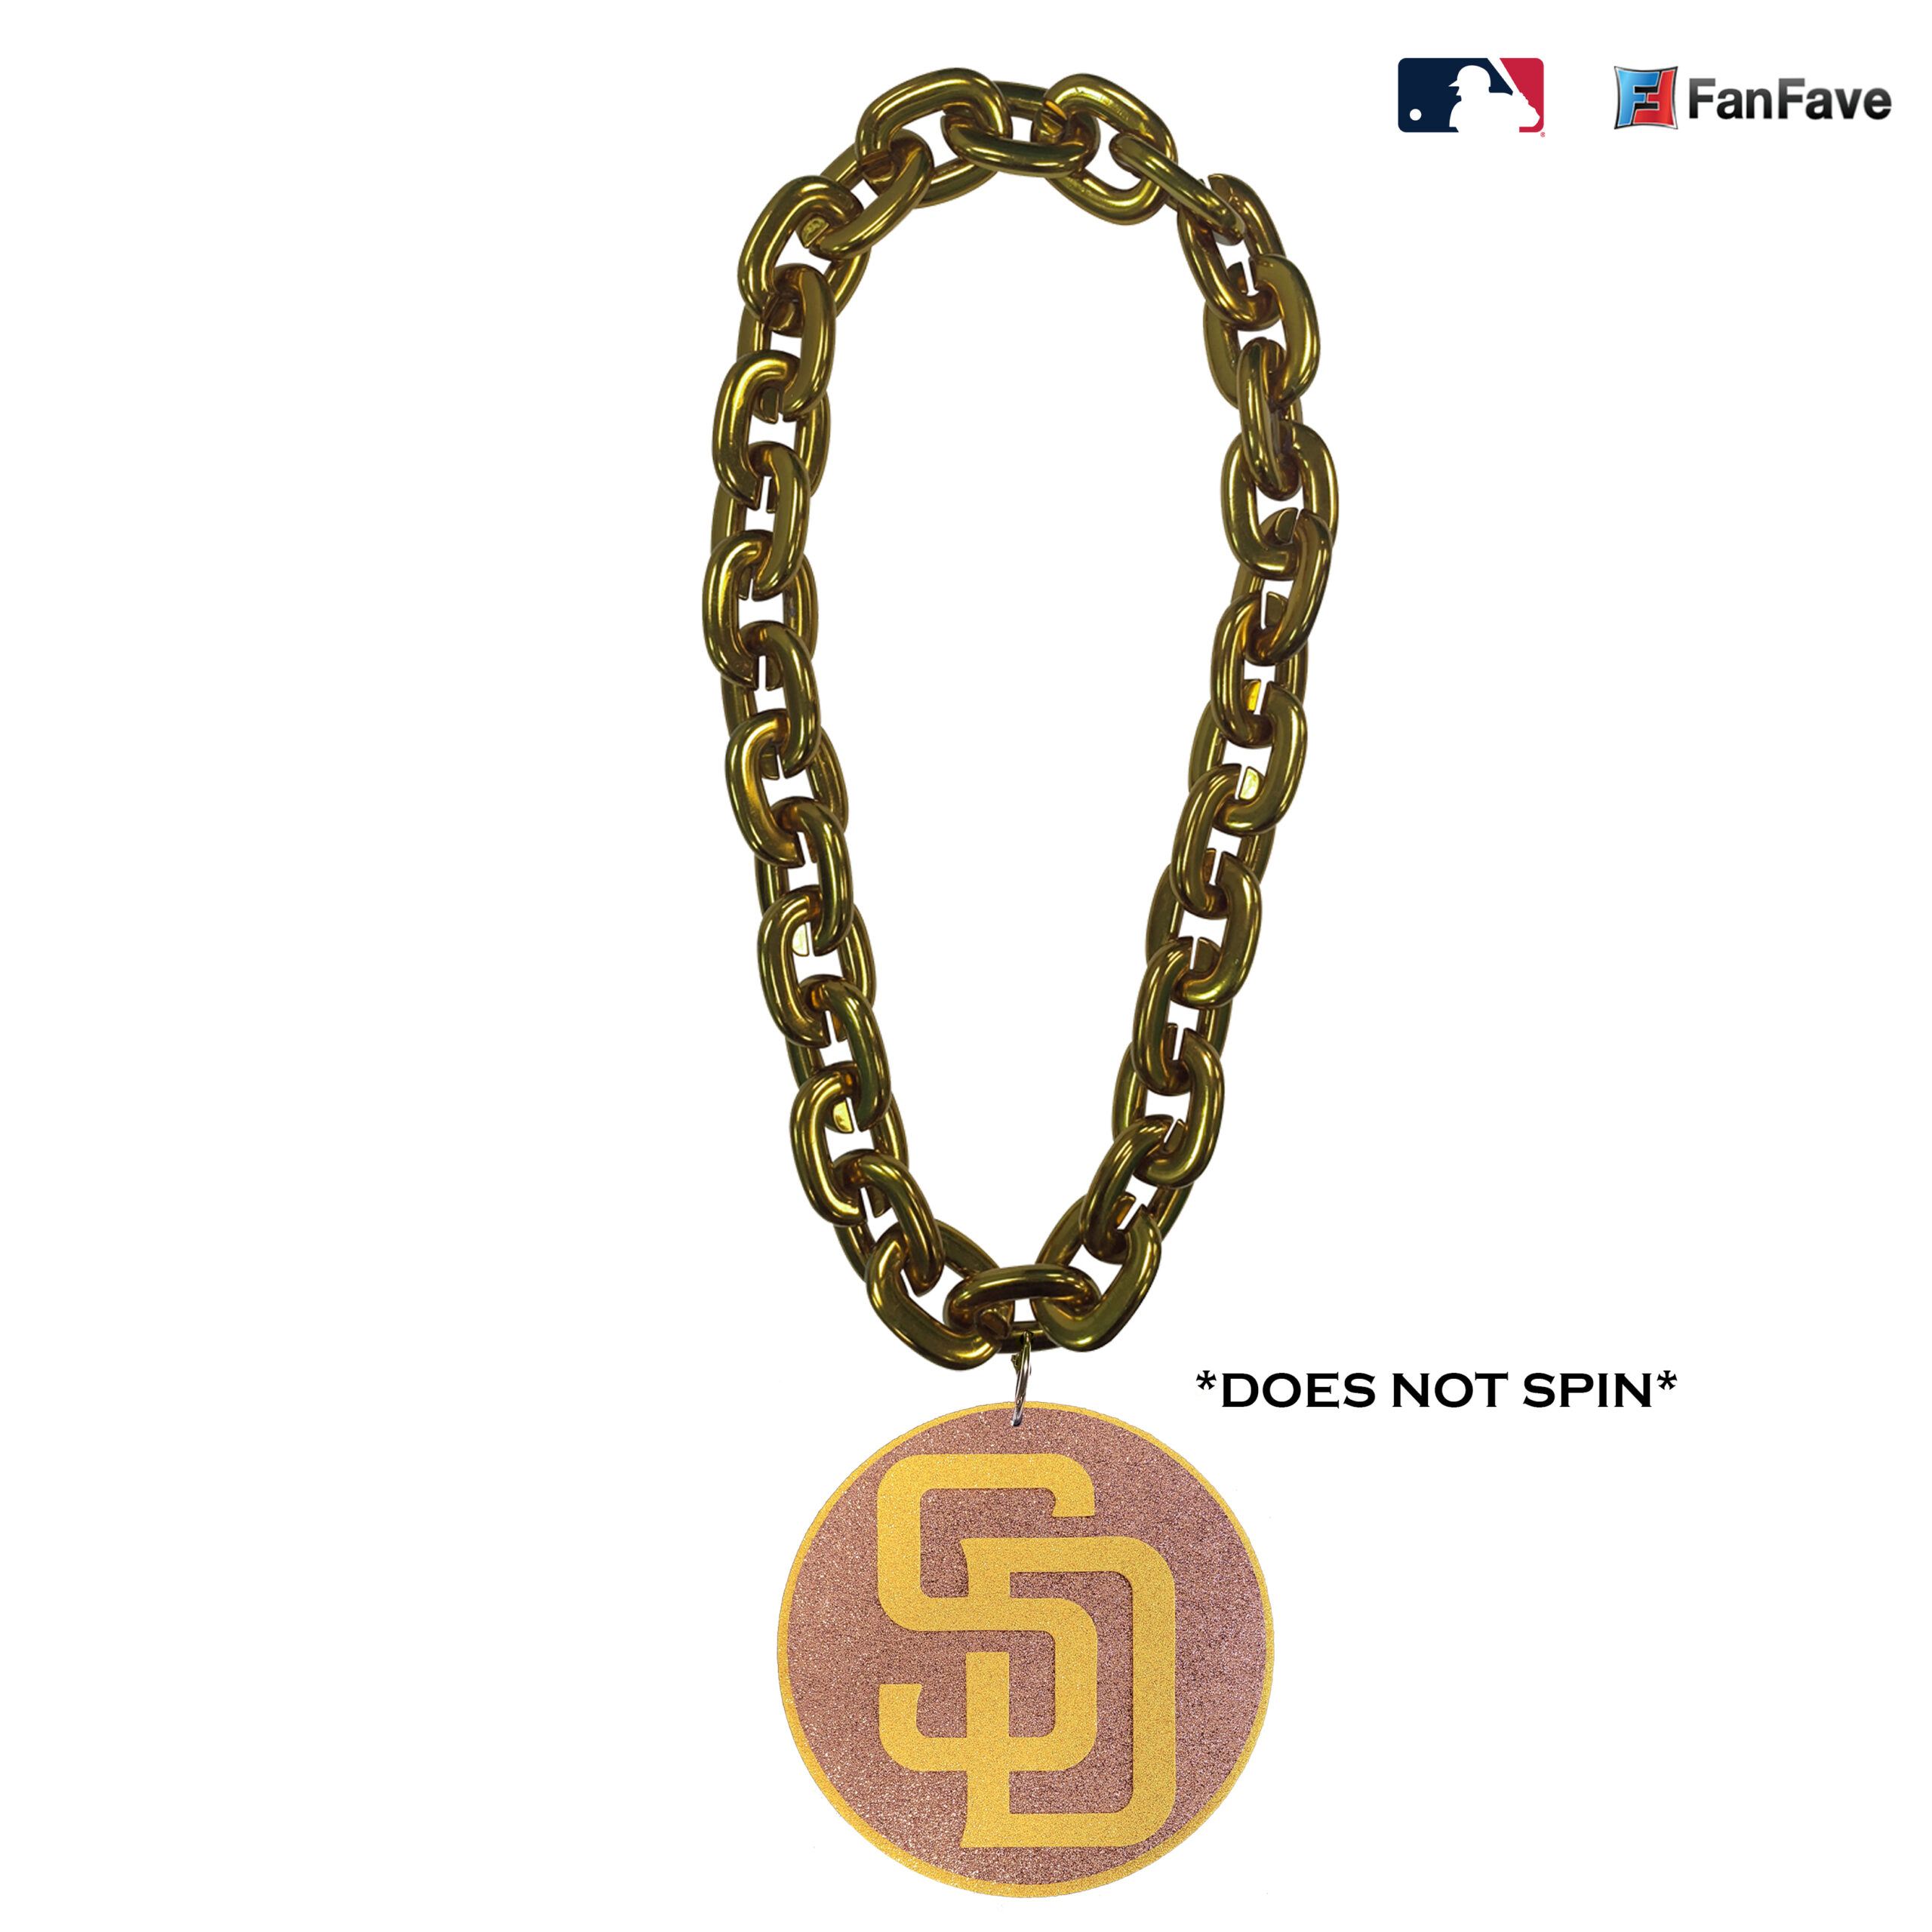 San Diego Padres' 'Swagg Chain' Honors Home Run Hitters and Player